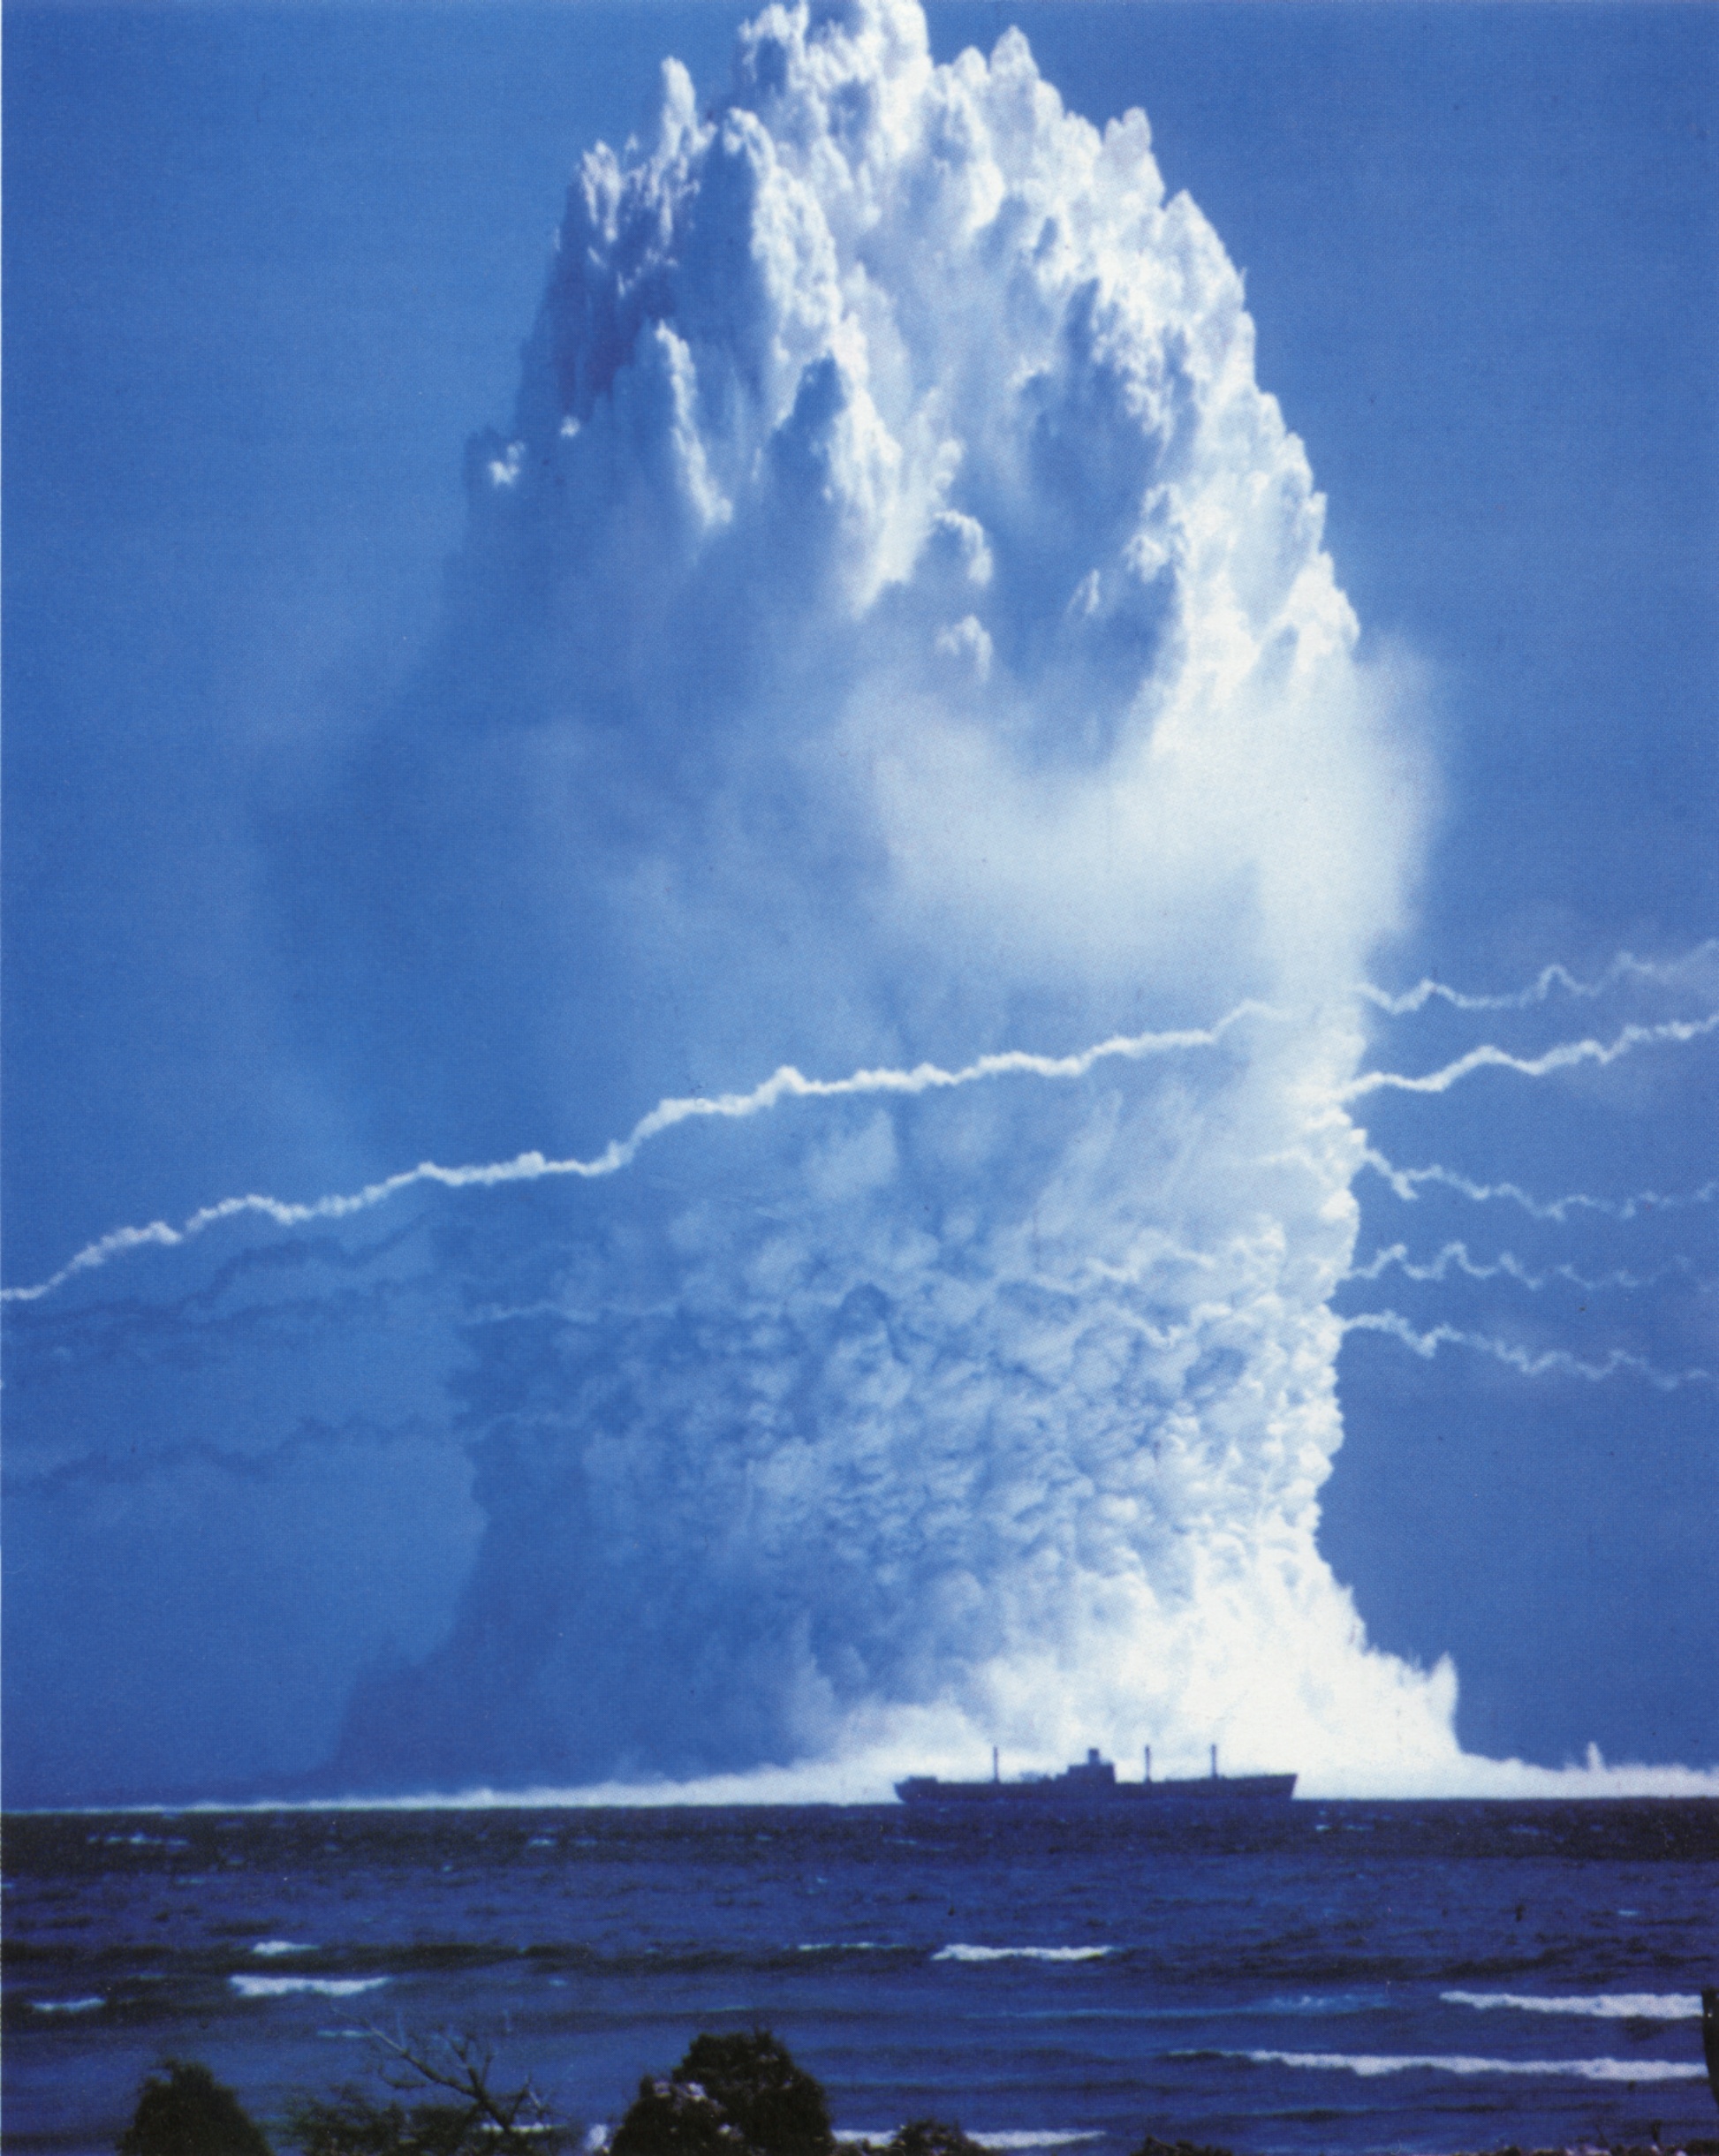 Nuclear explosions